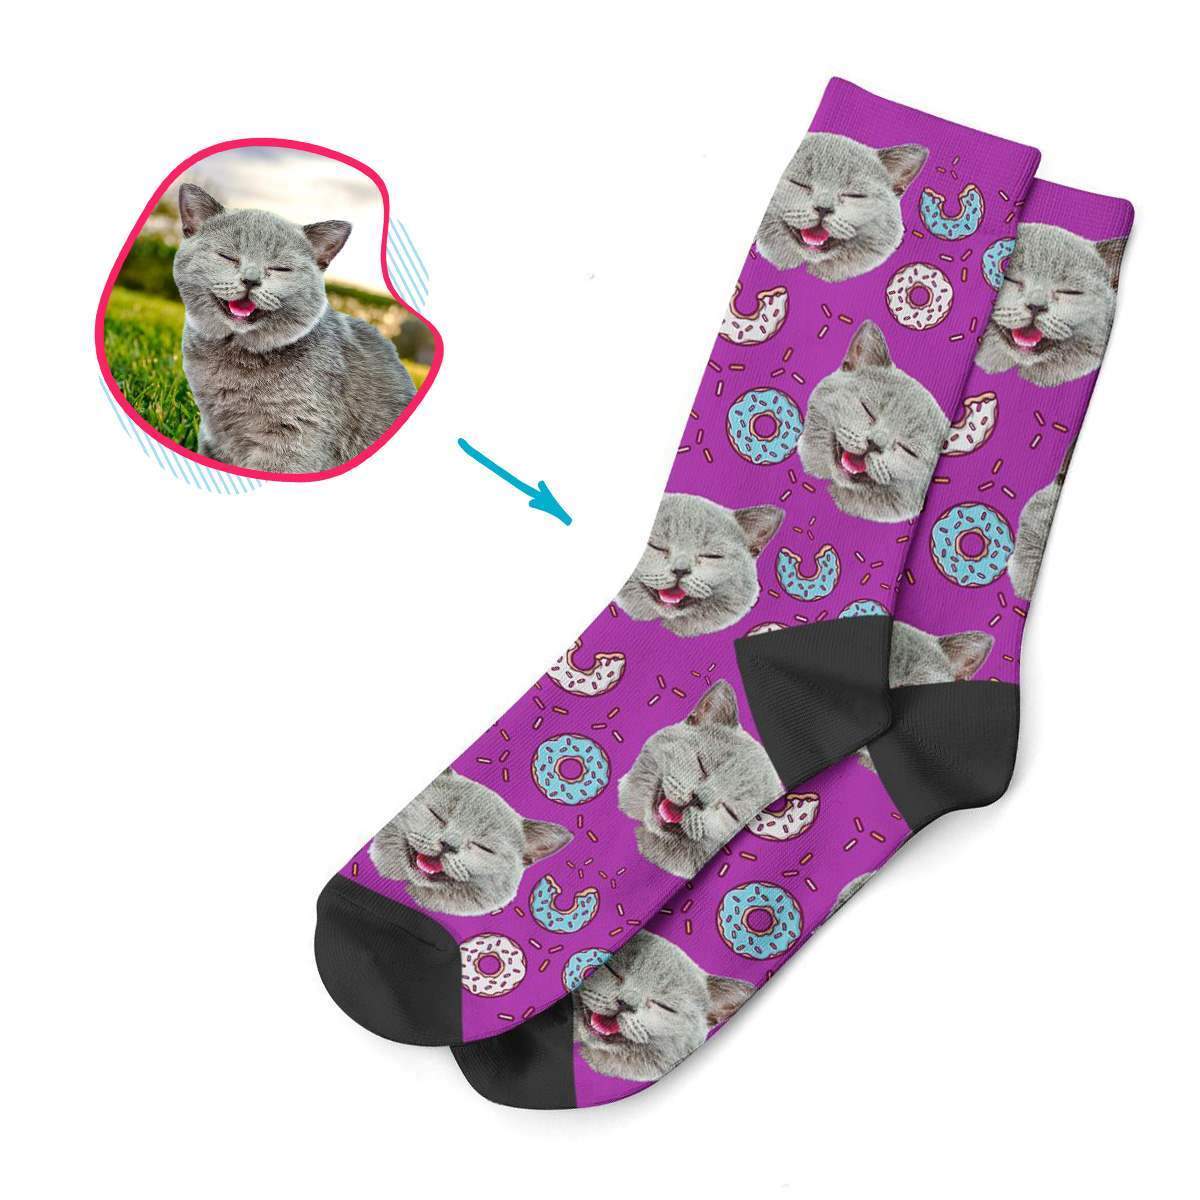 purple Donuts socks personalized with photo of face printed on them